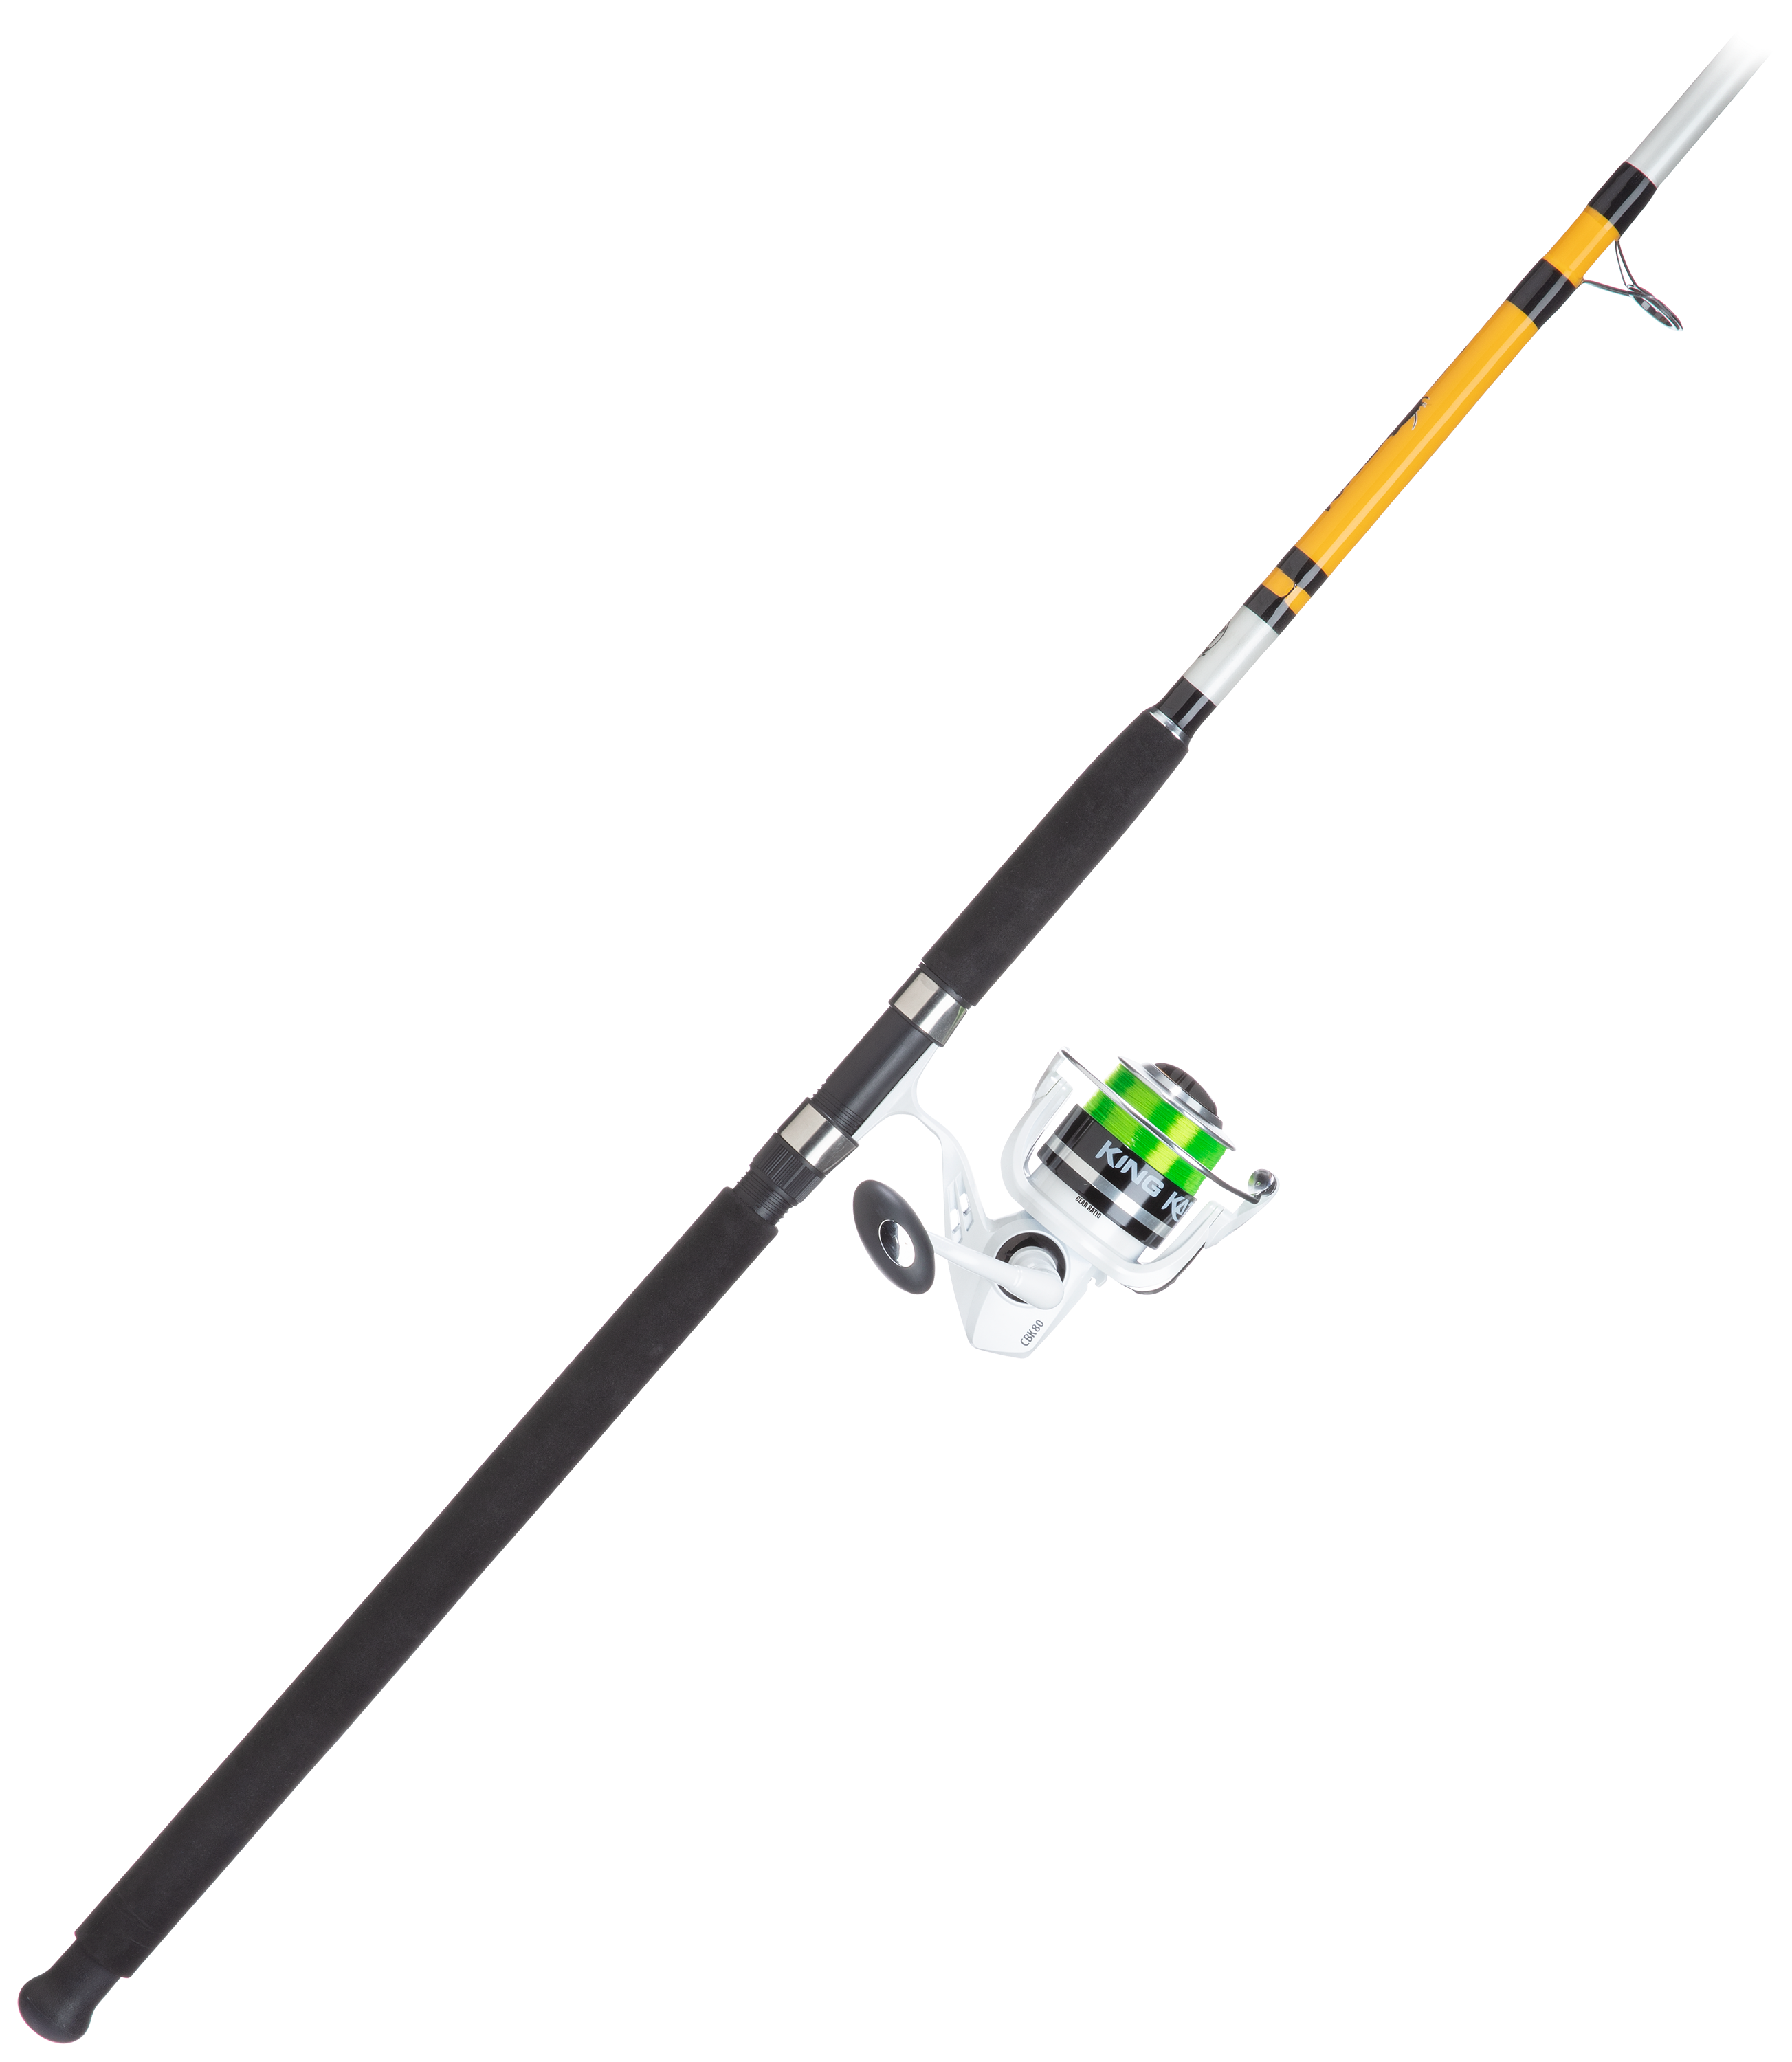 Bass Pro Shops King Kat Rod and Reel Spinning Combo - 80 - 10' - Heavy - 4.1:1